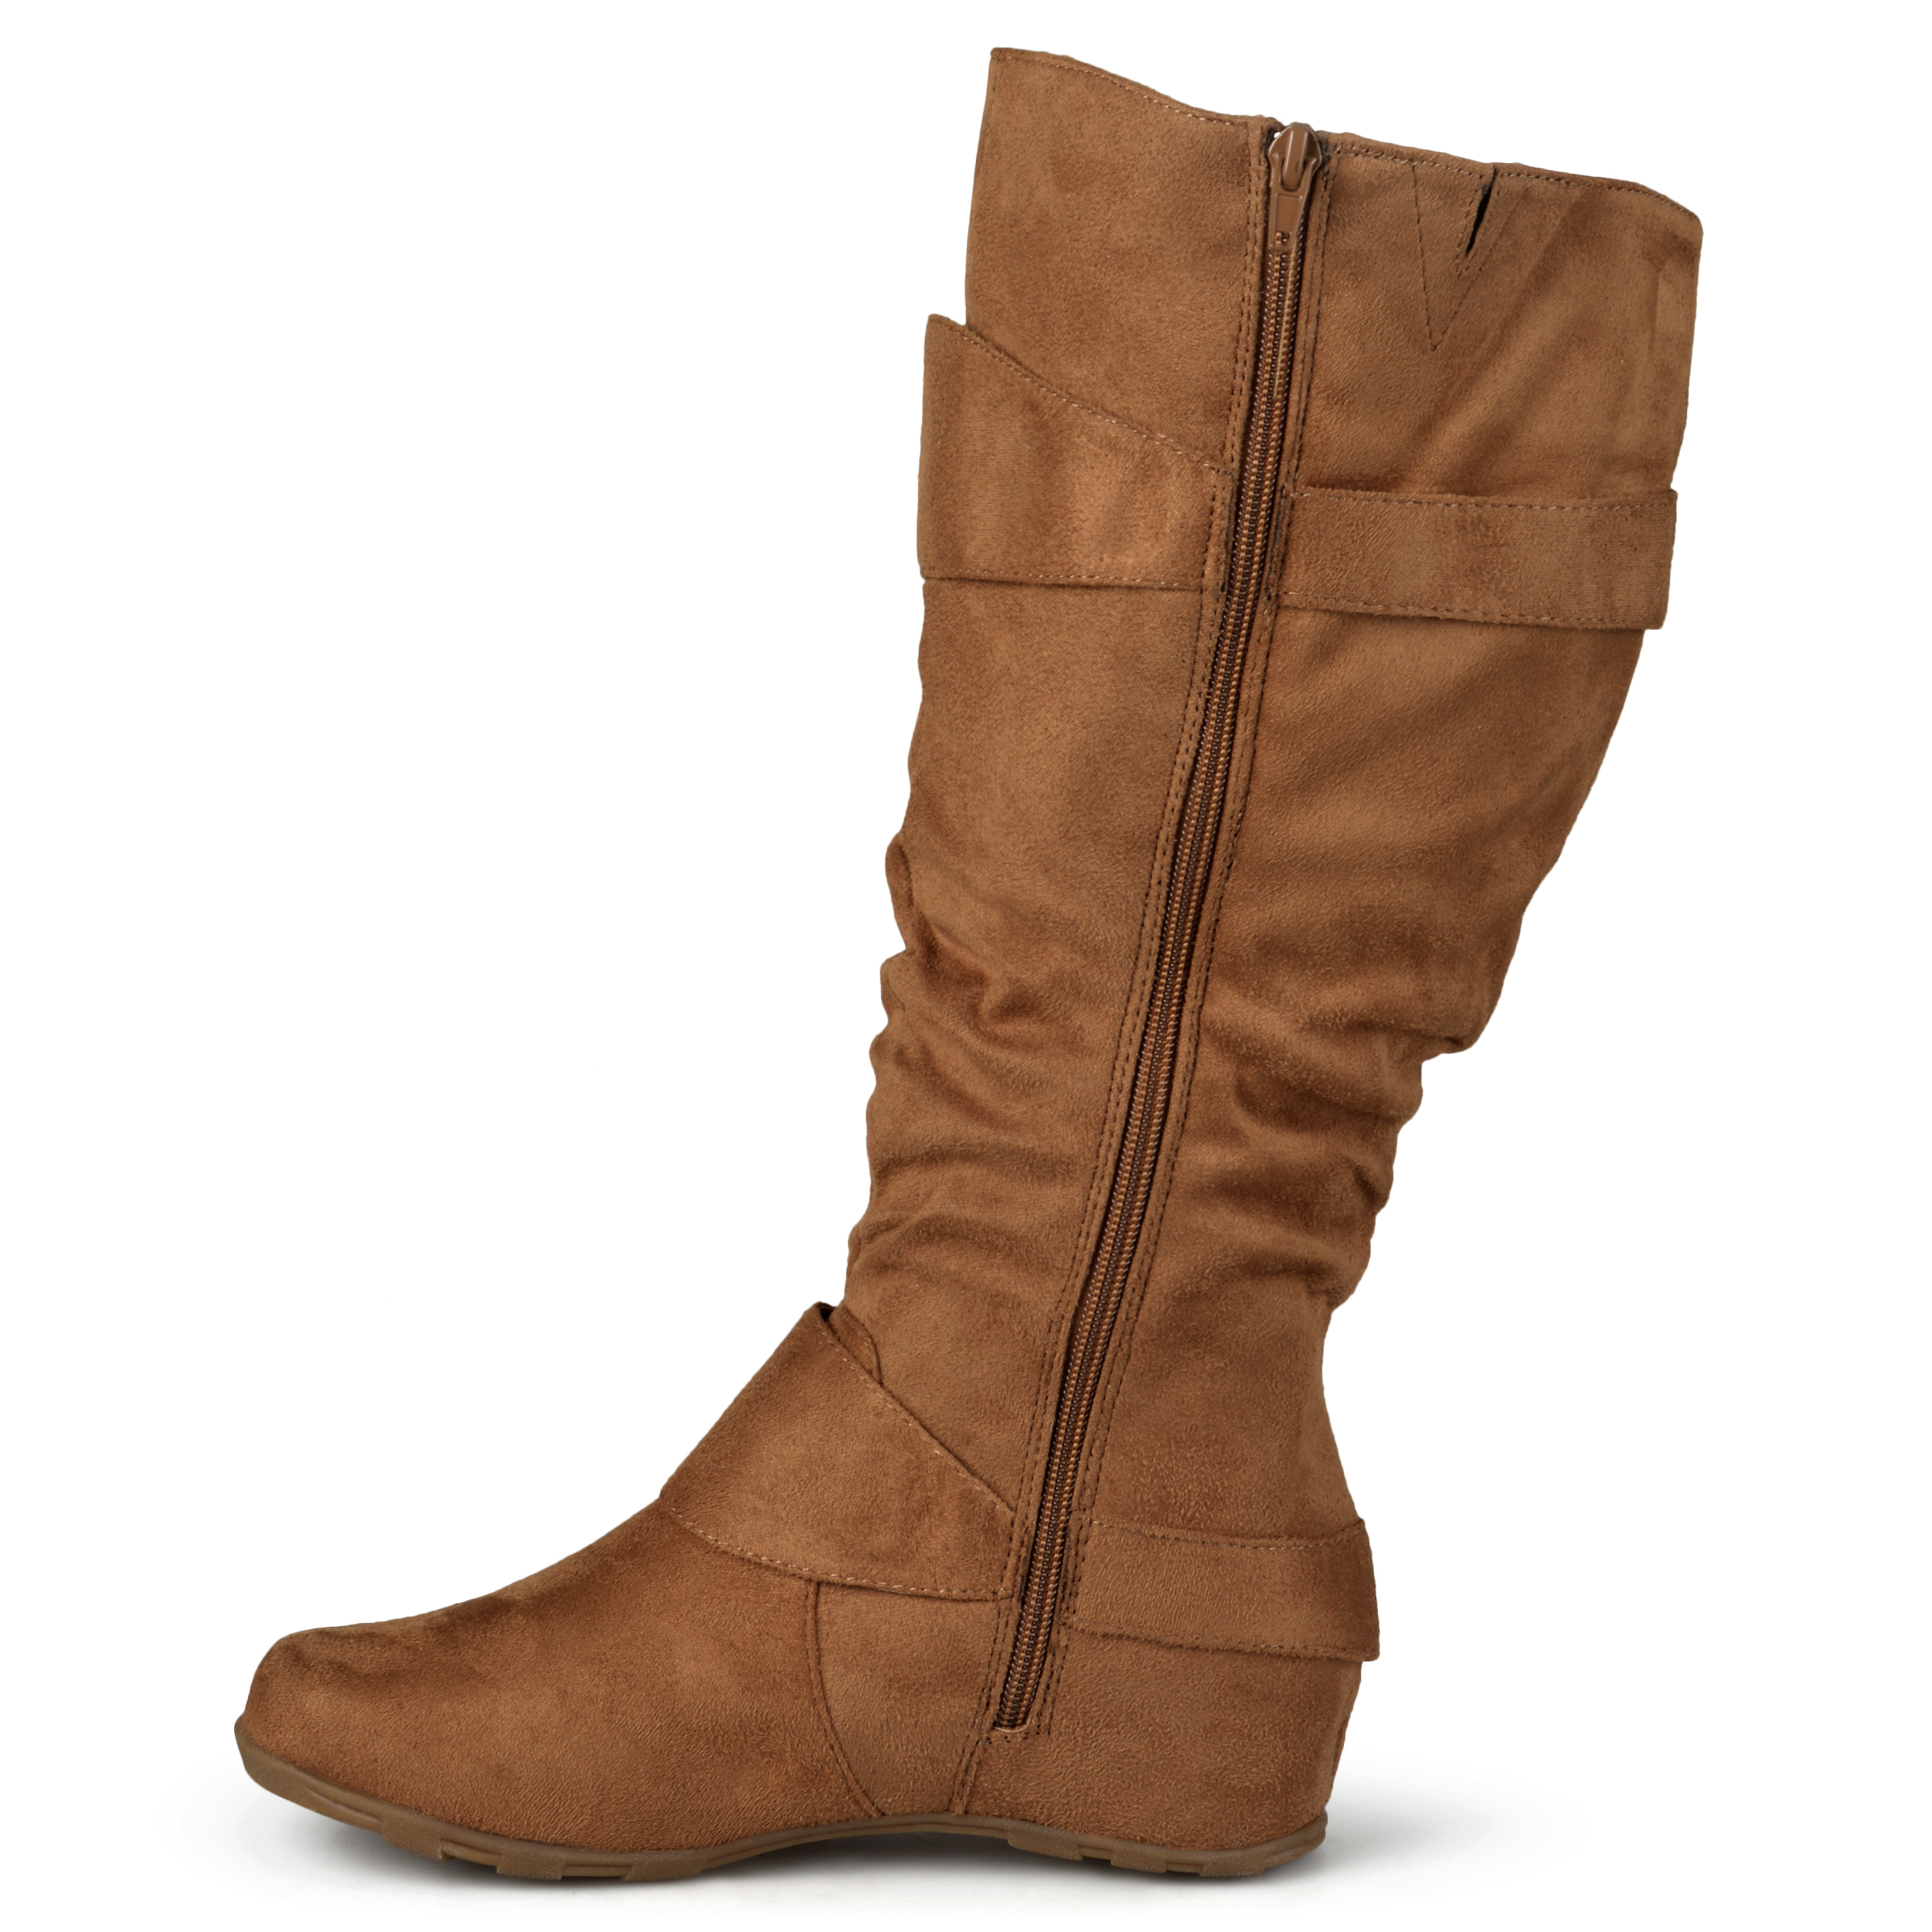 Brinley Co. Womens Wide Calf Dress Boot - image 3 of 8